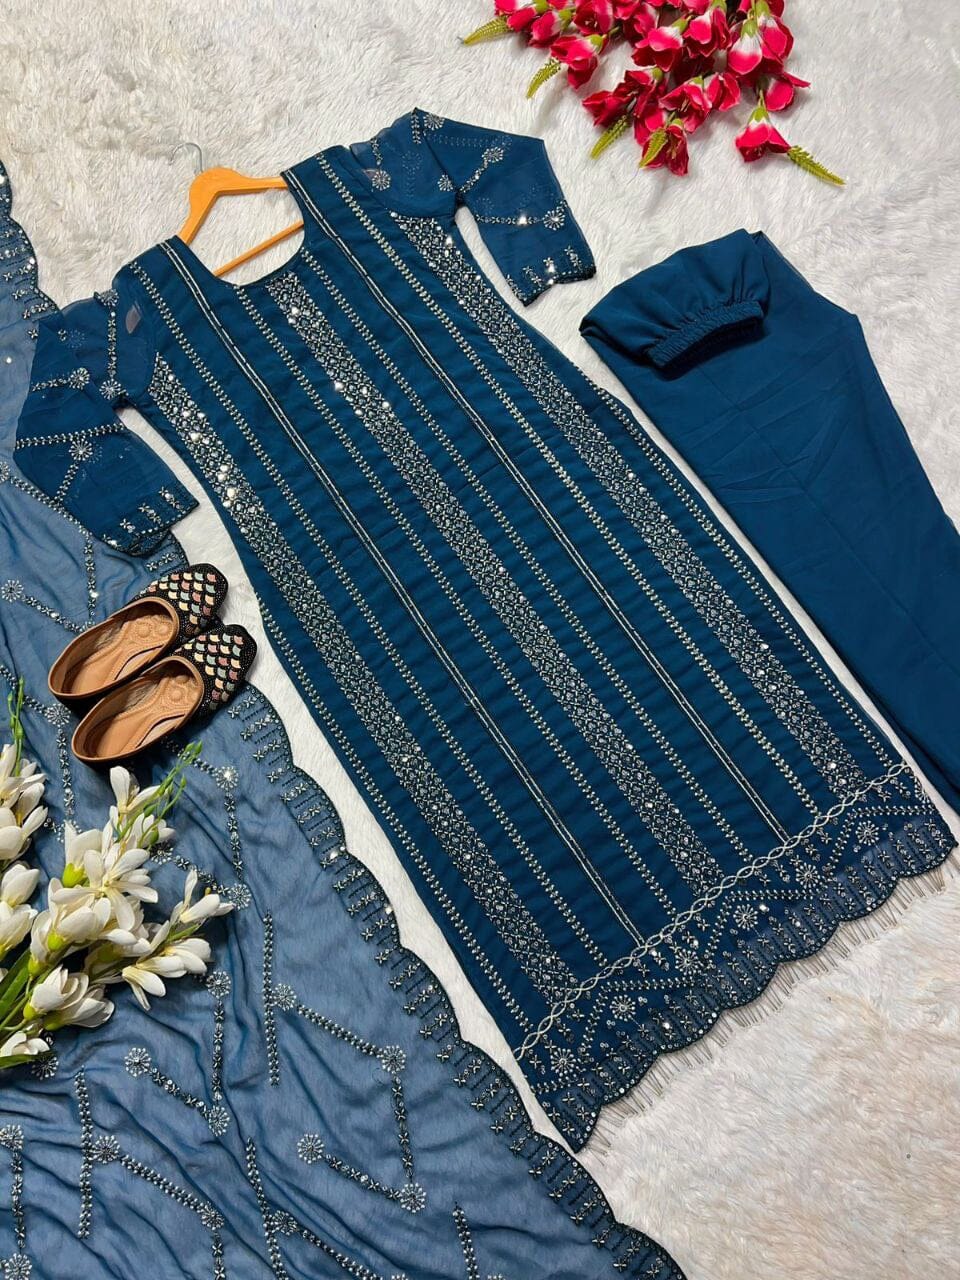 NF 1198 Blue Designer Georgette Sequence Readymade Suit Ready Made Designer Suits Shopin Di Apparels 